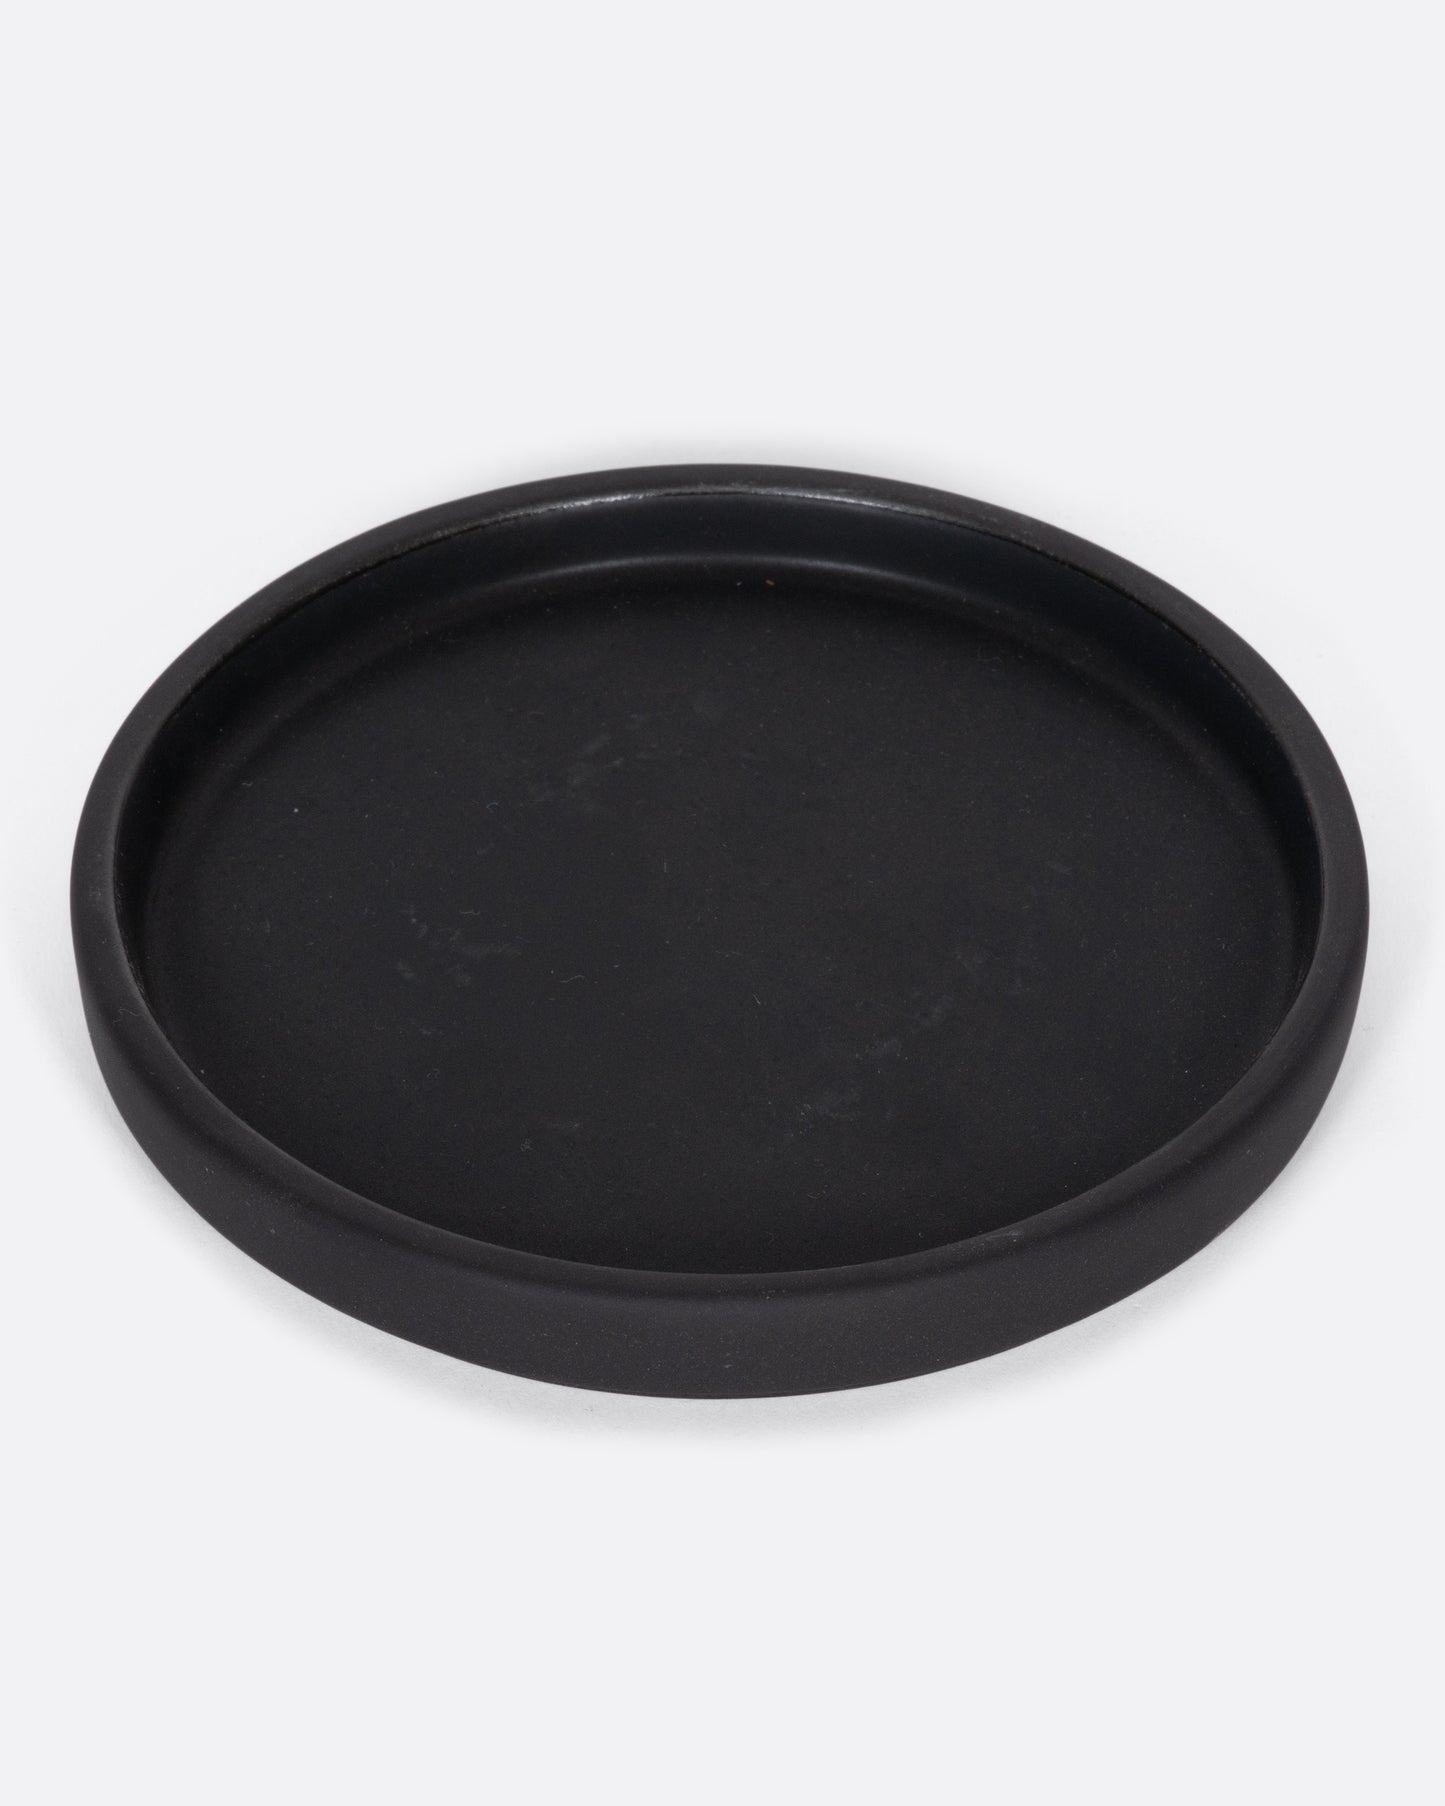 This black ceramic plate with a raised lip and matte black finish looks beautiful with tall candles and works great for small plants, too.